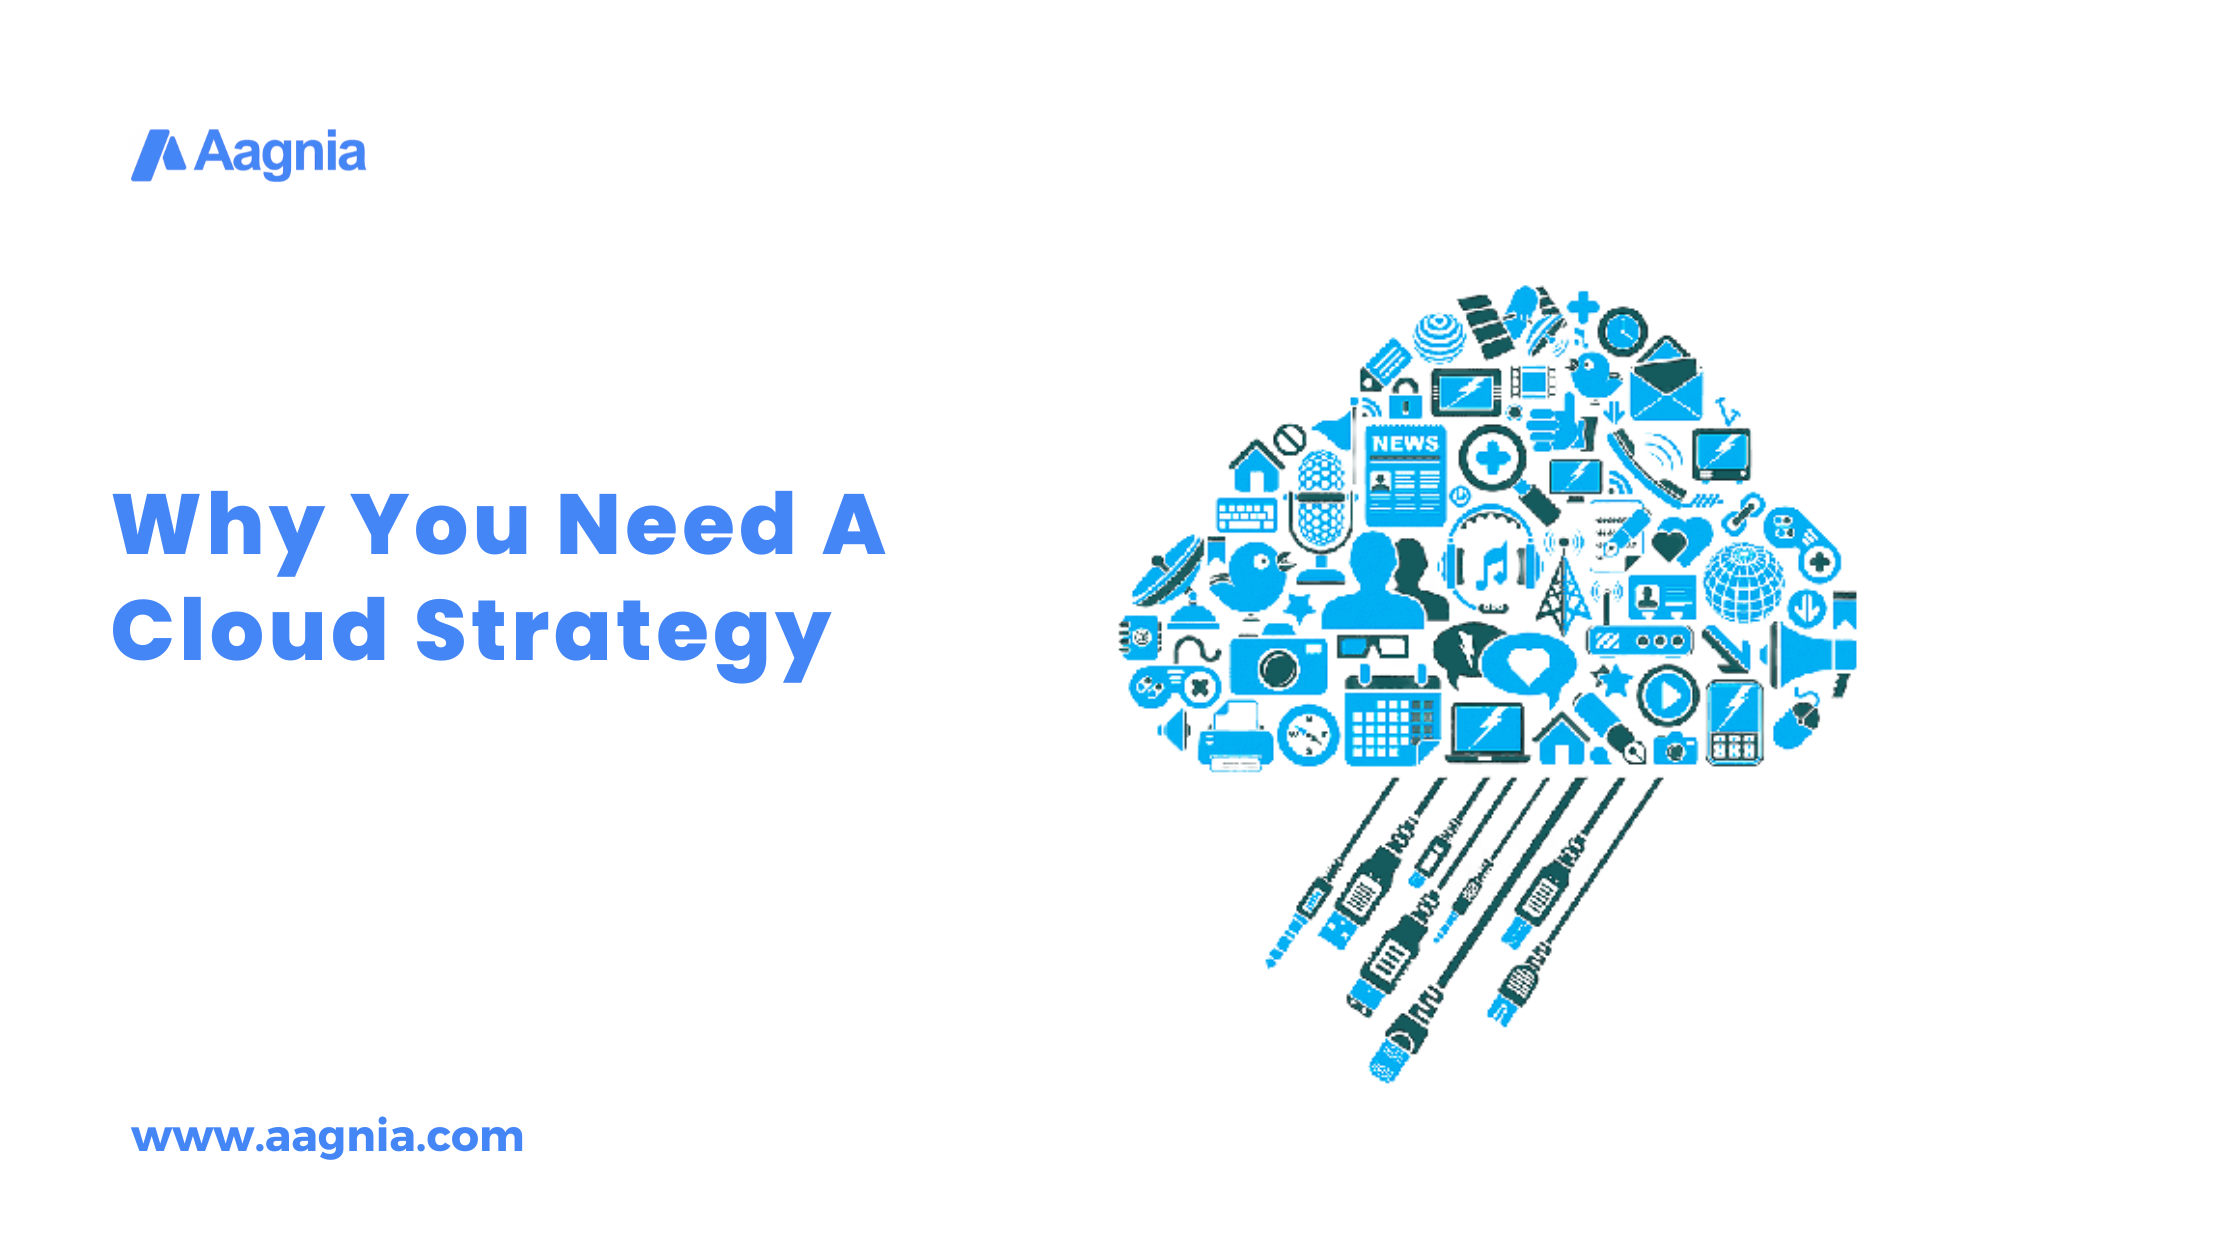 Why should do cloud strategy